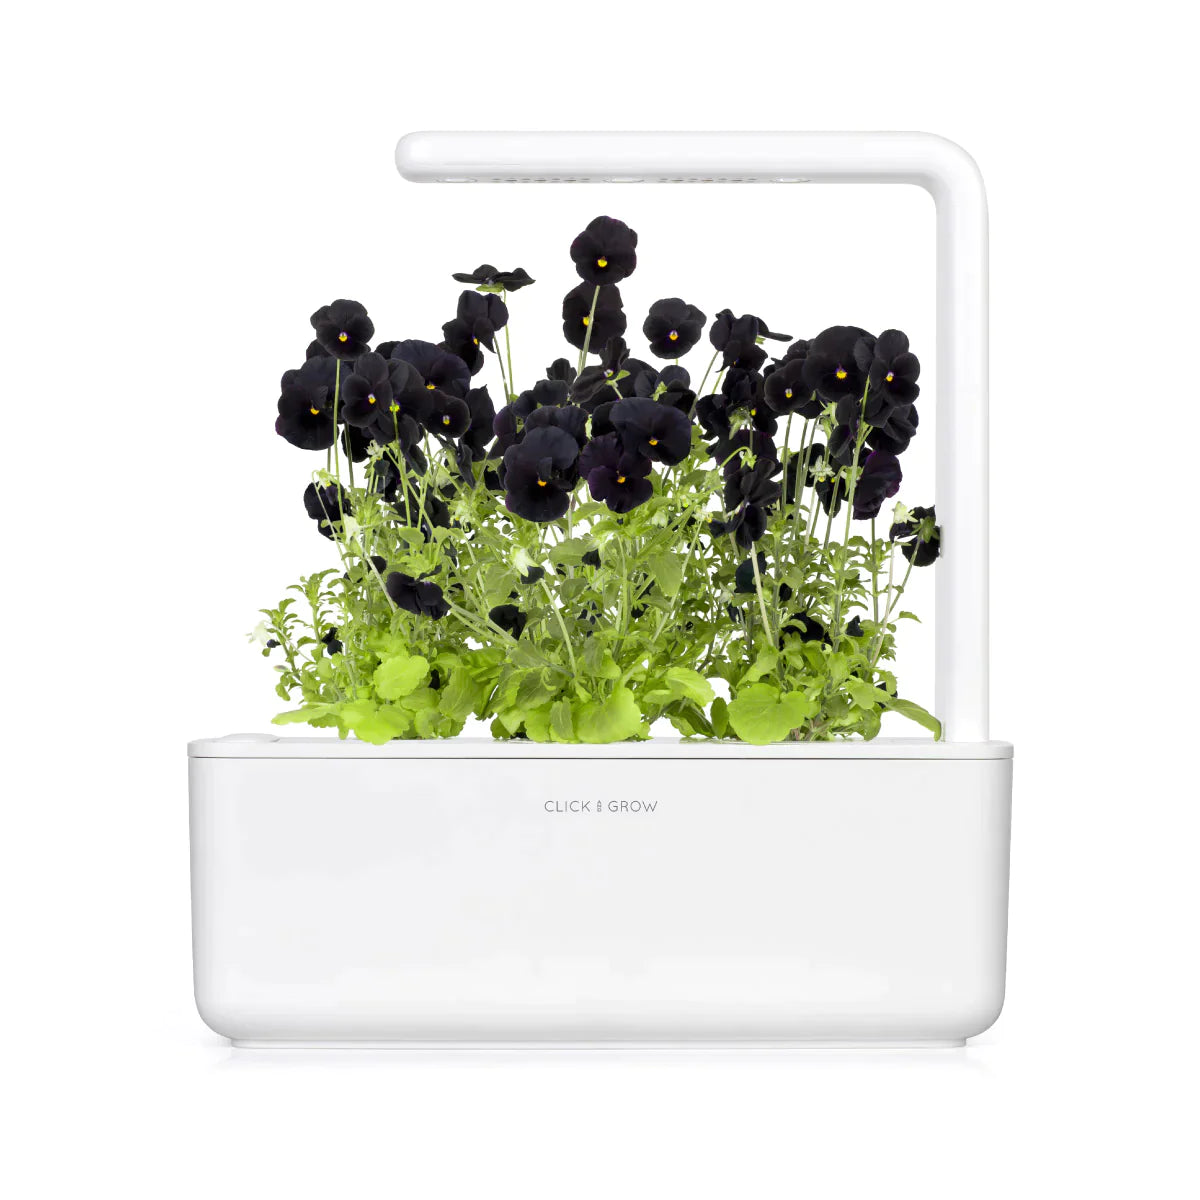 Black Pansy Plant Pods for Click and Grow Gardens